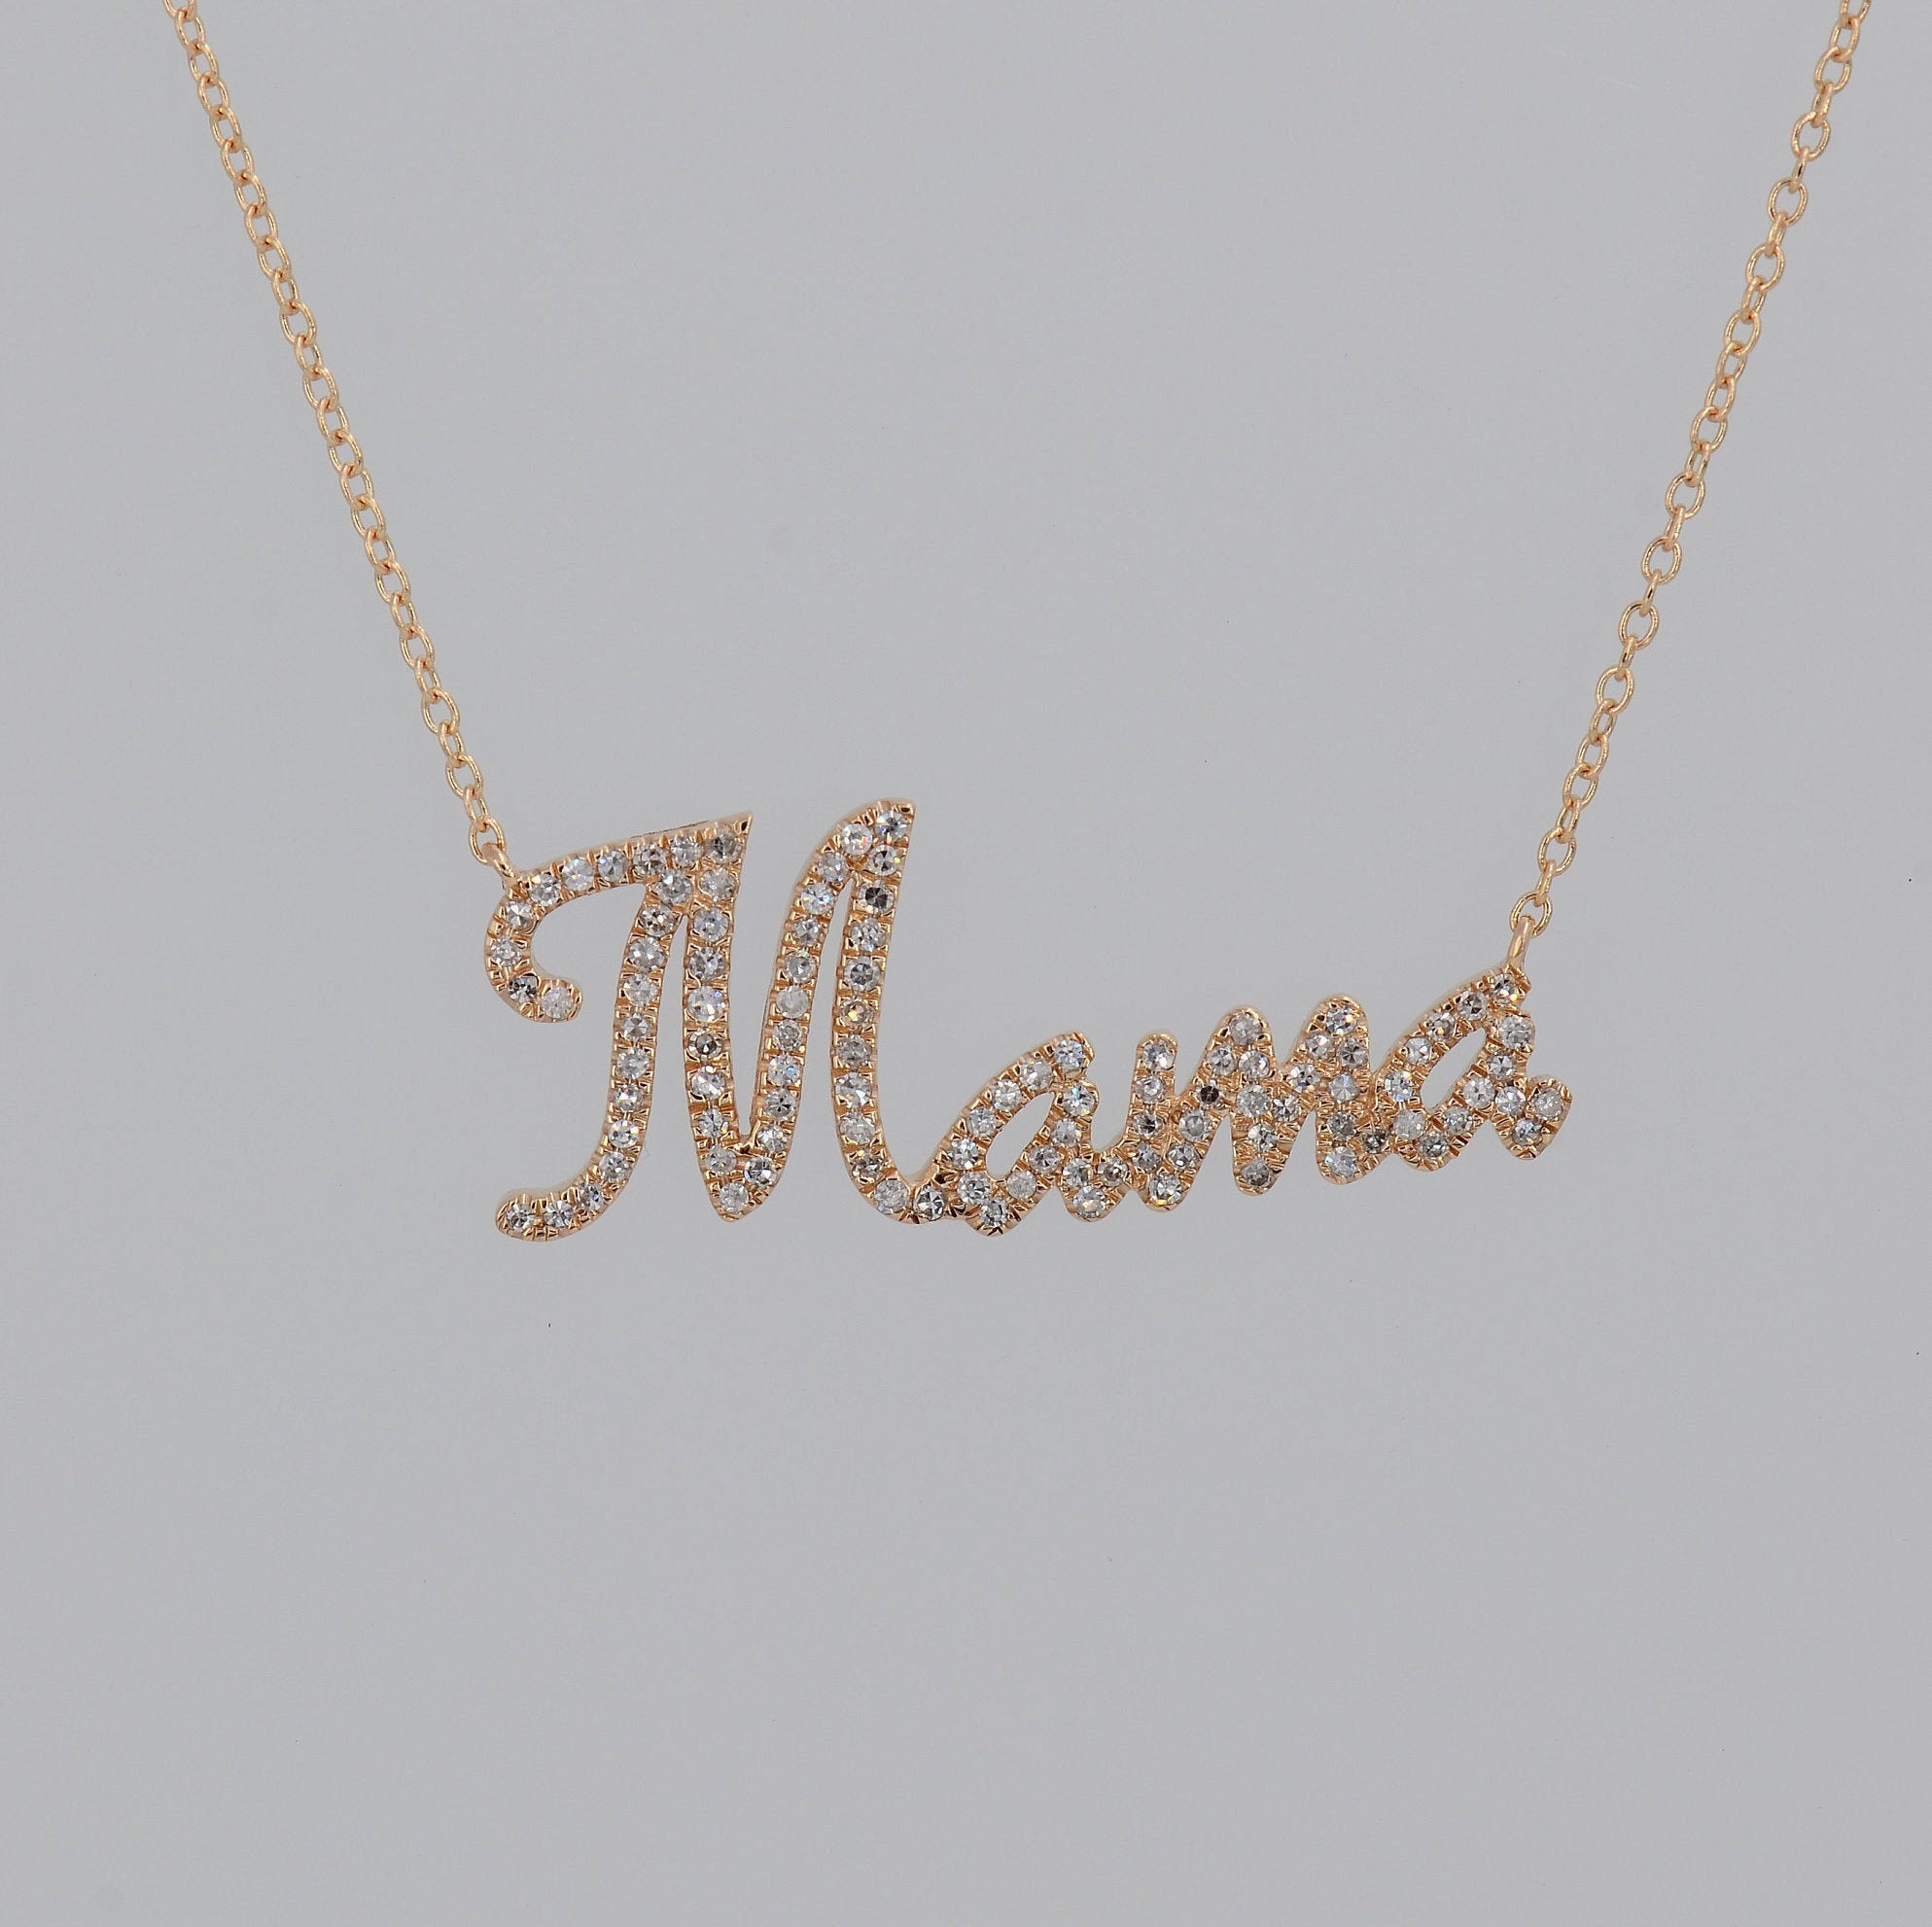 Mama Necklace, Mommy Nameplate necklace, 14k Gold Diamond Mother necklace, Personalized Name Necklace, Mom's Gift, Custom Name Necklace Gift